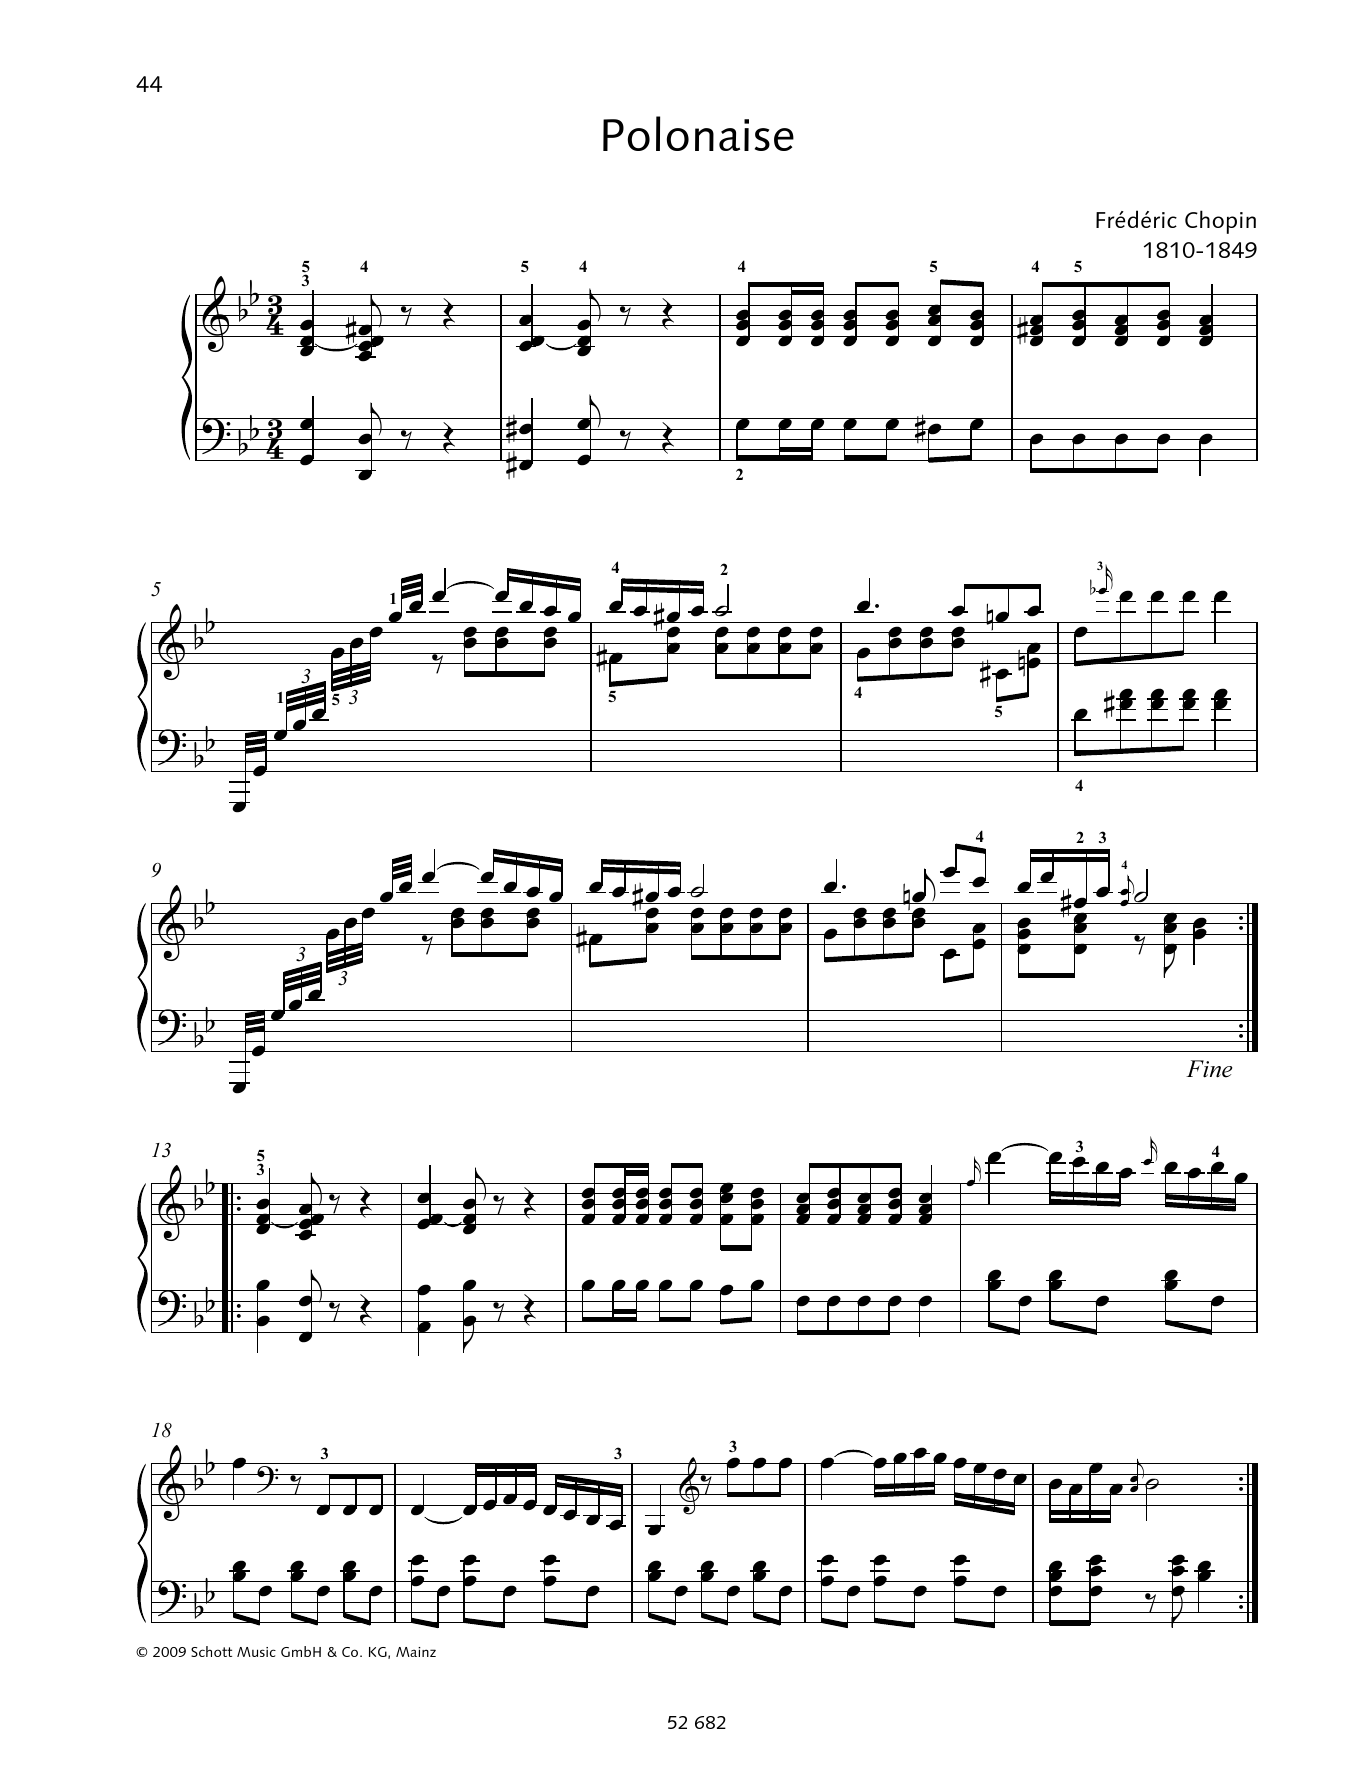 Download Frédéric Chopin Polonaise in G minor Sheet Music